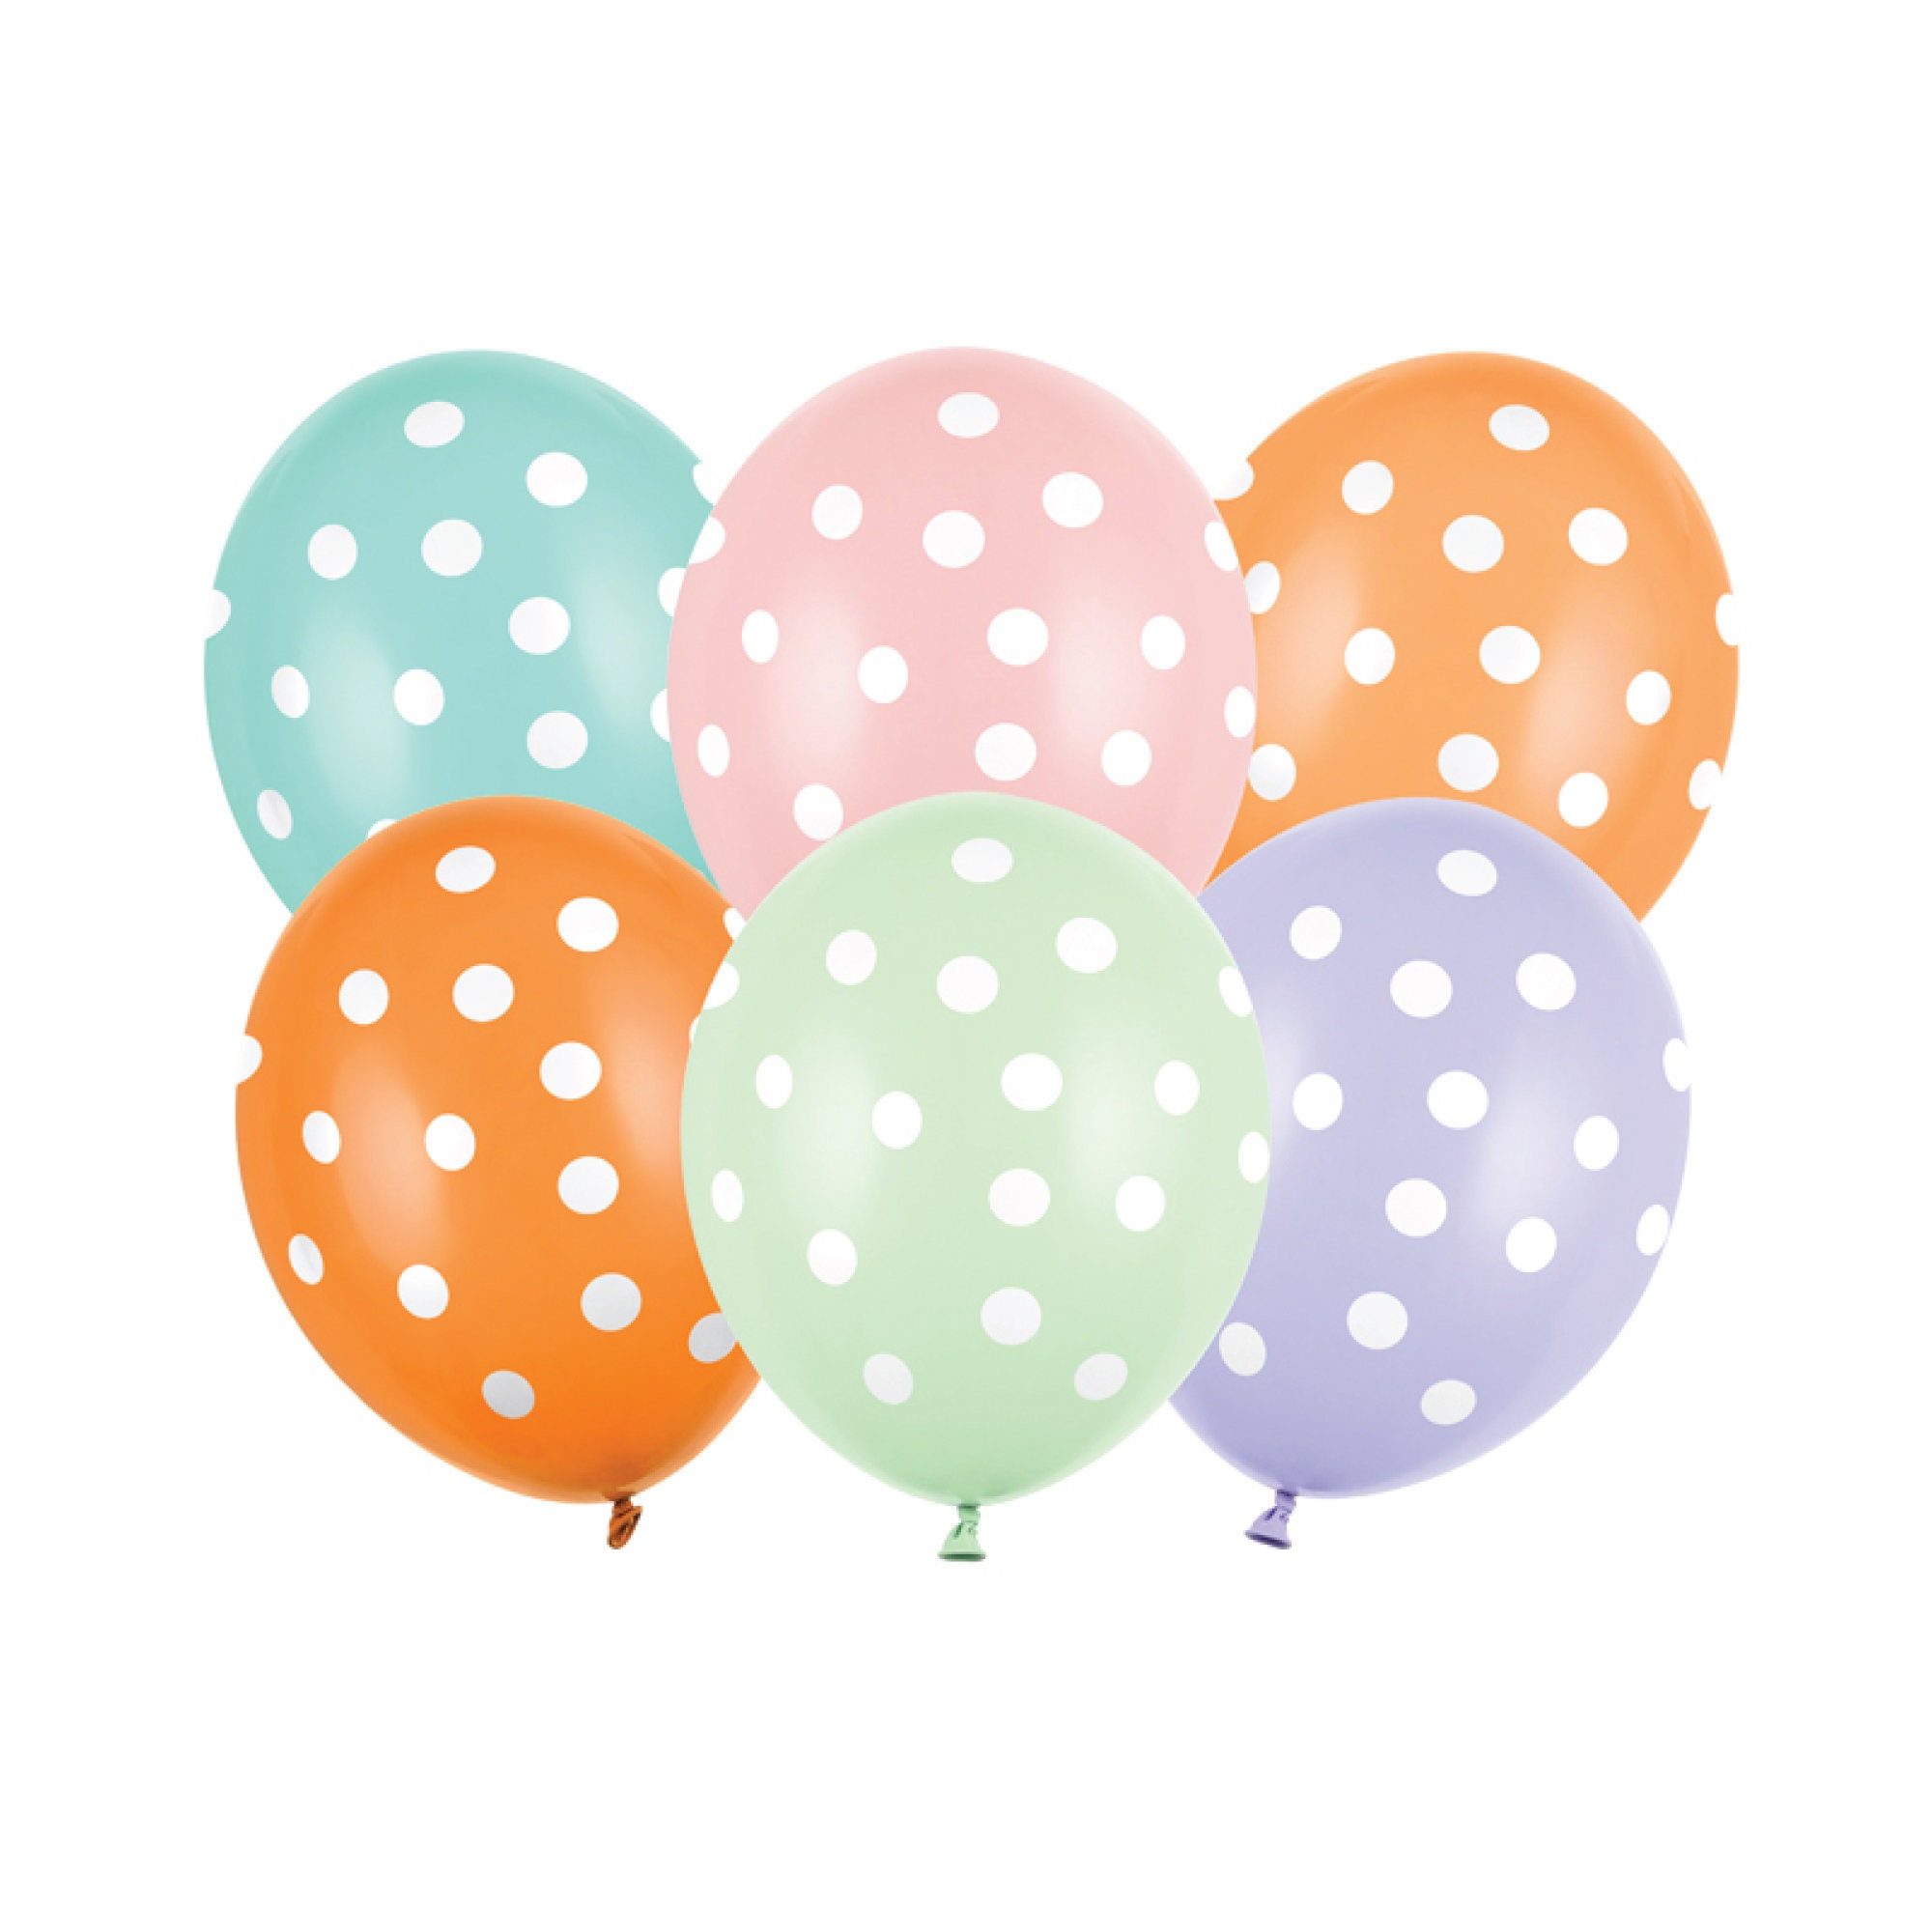 DIY Polka Dot Balloons in 3 Ways, How To Make Balloon With Dots